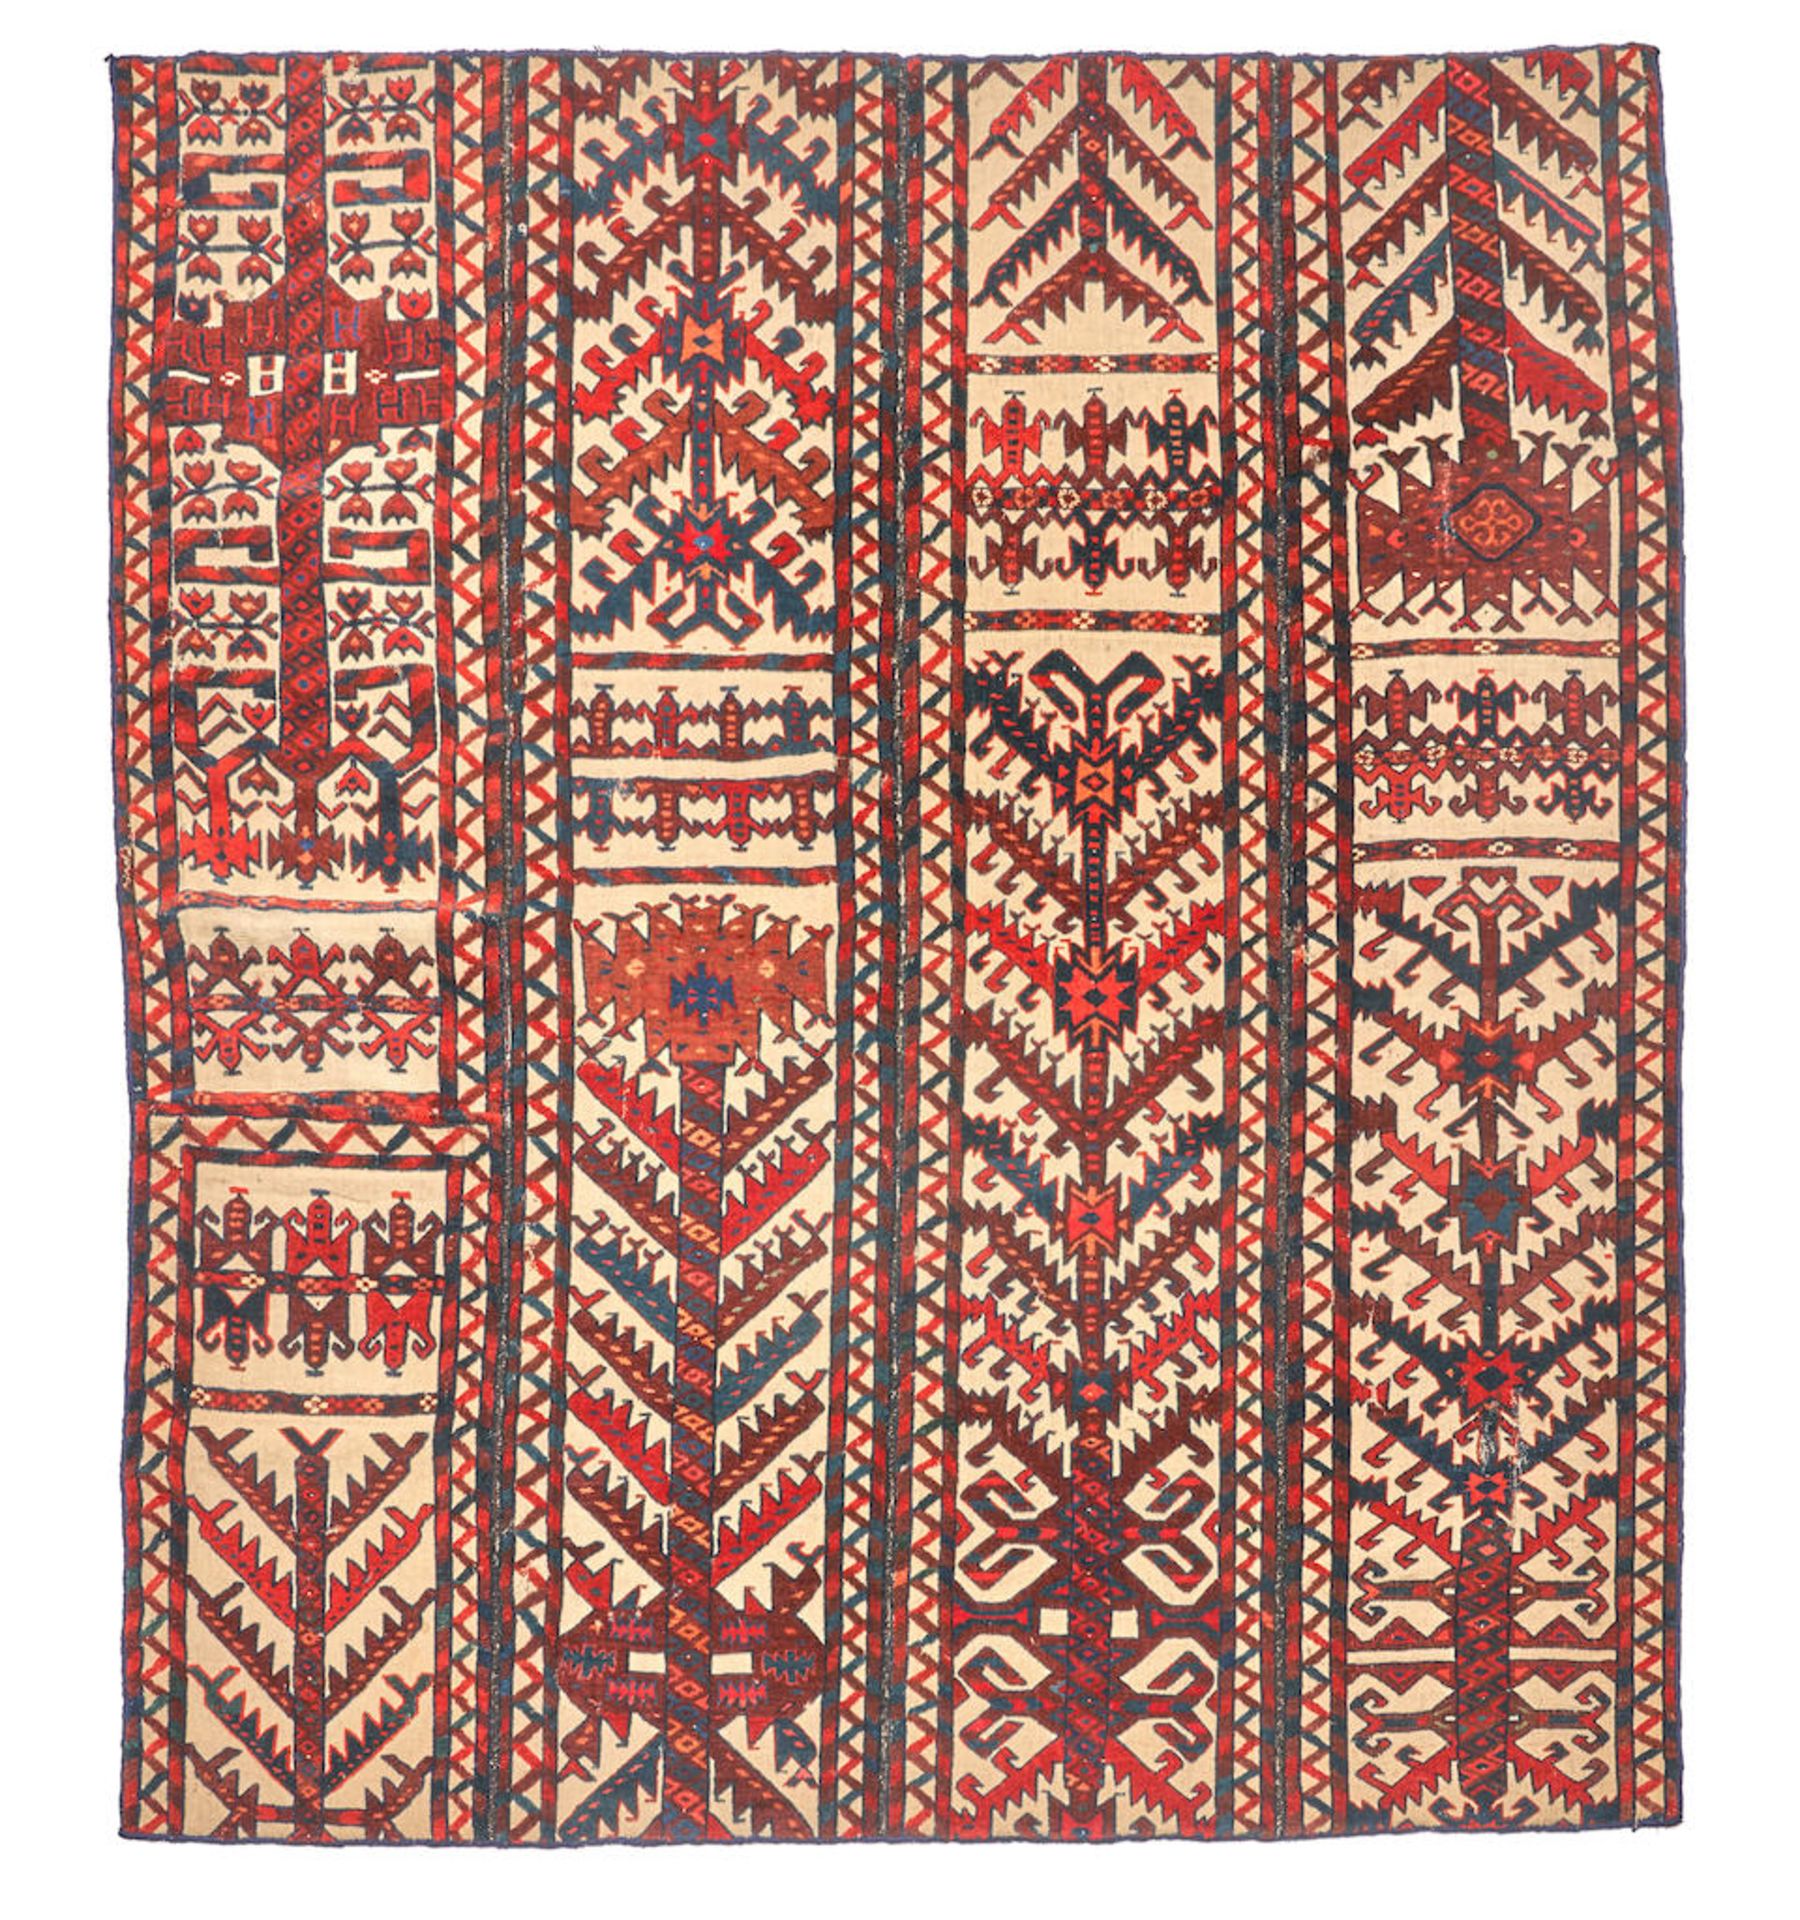 Yomud Tentband Panel Turkmenistan 5 ft. 2 in. x 9 ft. 5 in.